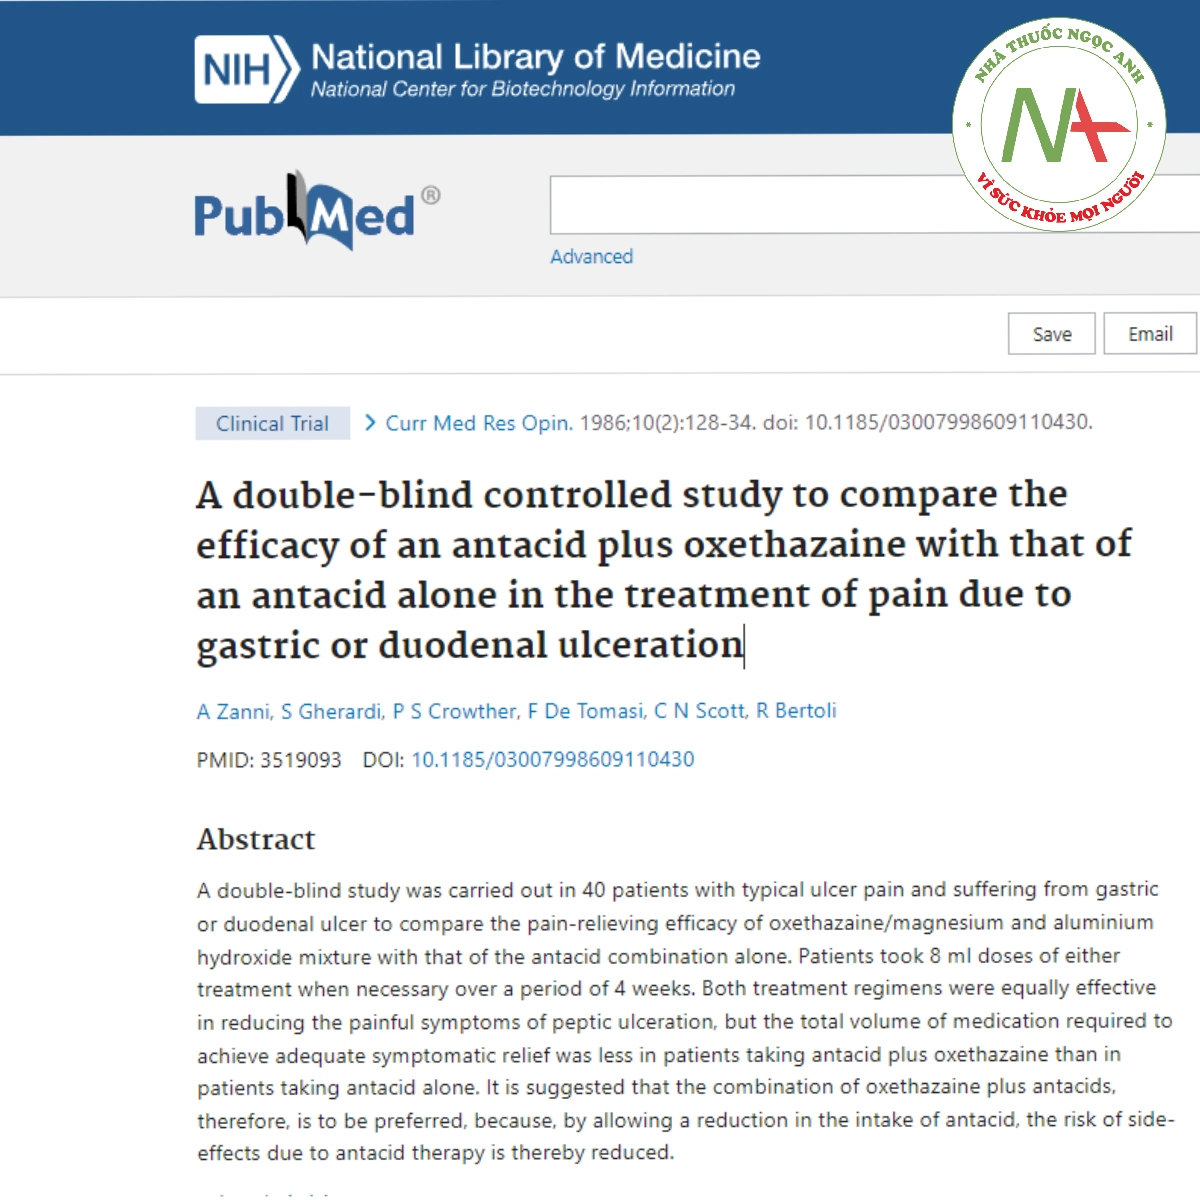 A double-blind controlled study to compare the efficacy of an antacid plus oxethazaine with that of an antacid alone in the treatment of pain due to gastric or duodenal ulceration